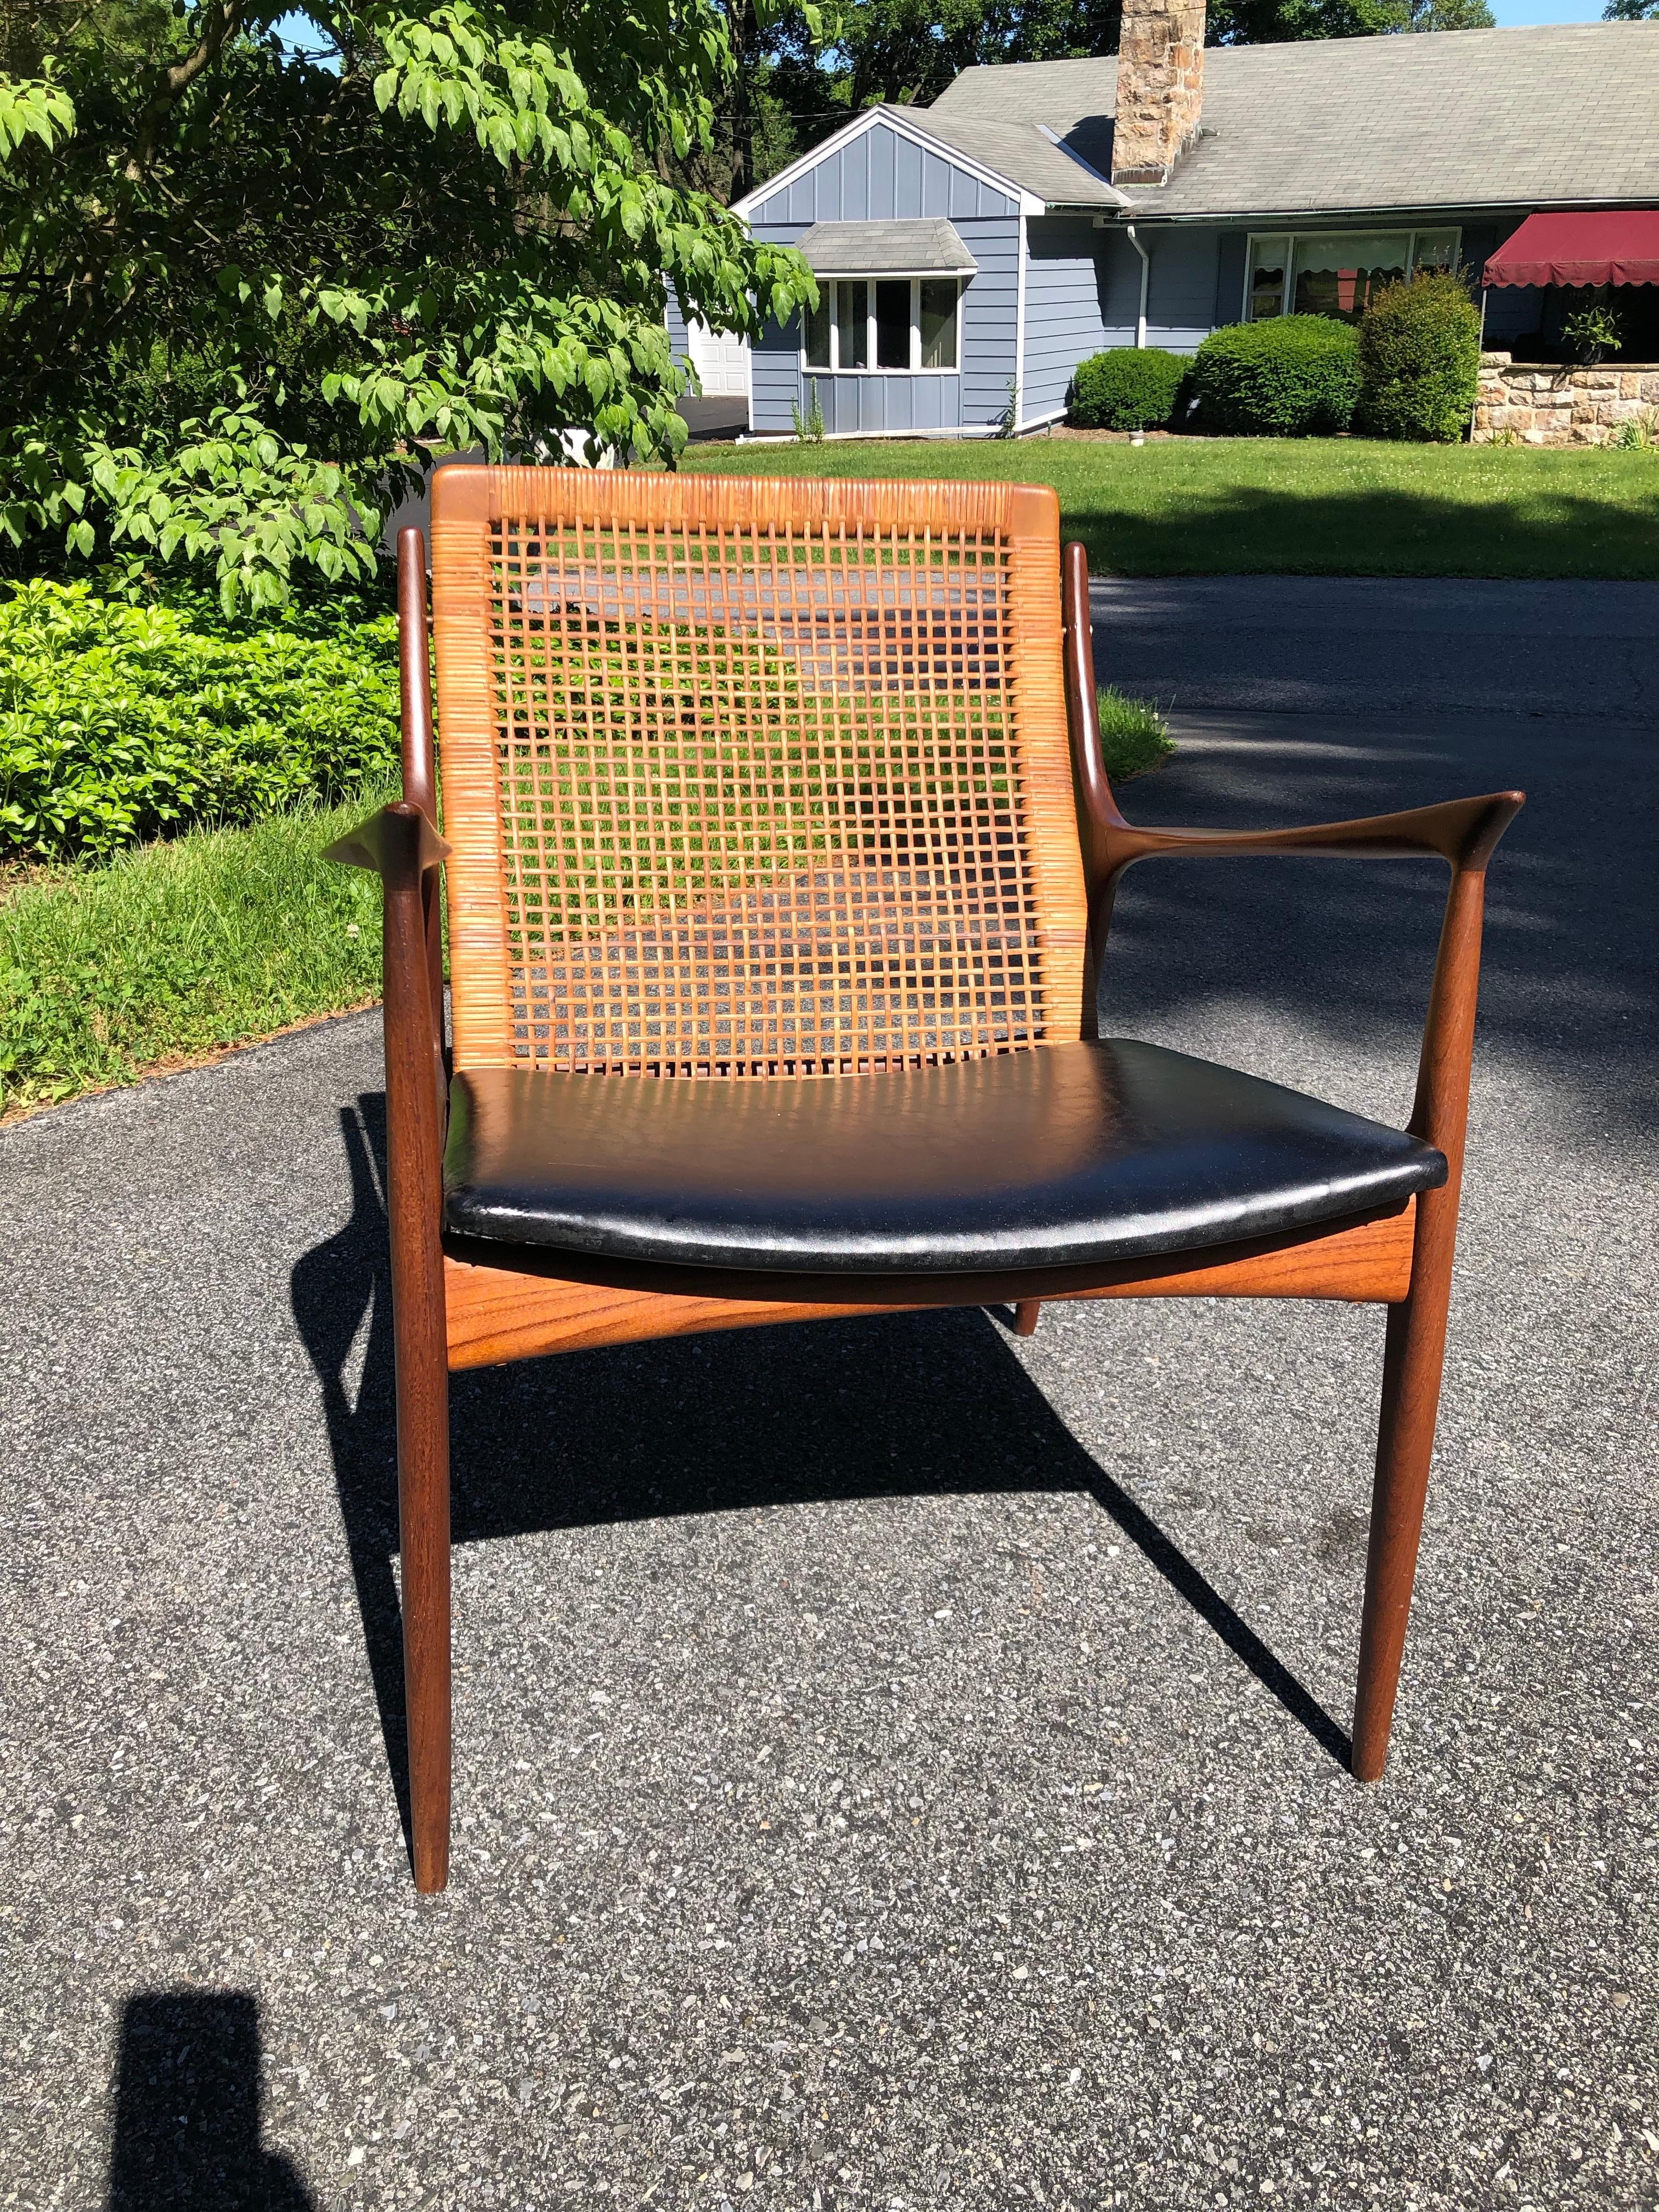 Ib Kofod Larsen Cane Back Lounge or Armchair In Good Condition For Sale In Allentown, PA